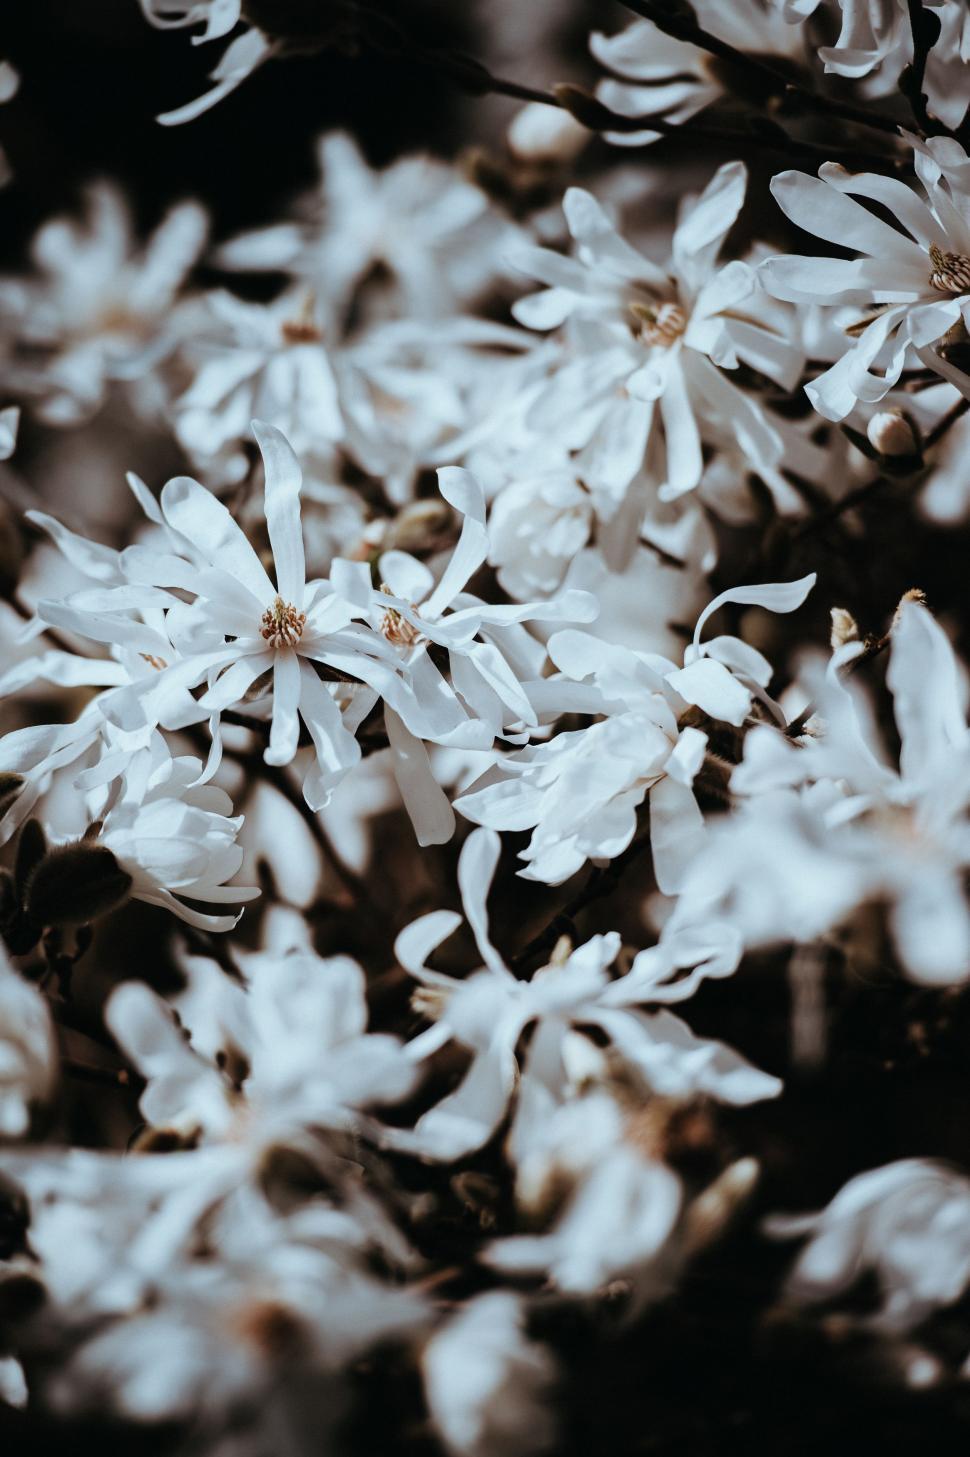 Free Image of Bunch of Flowers in Black and White 